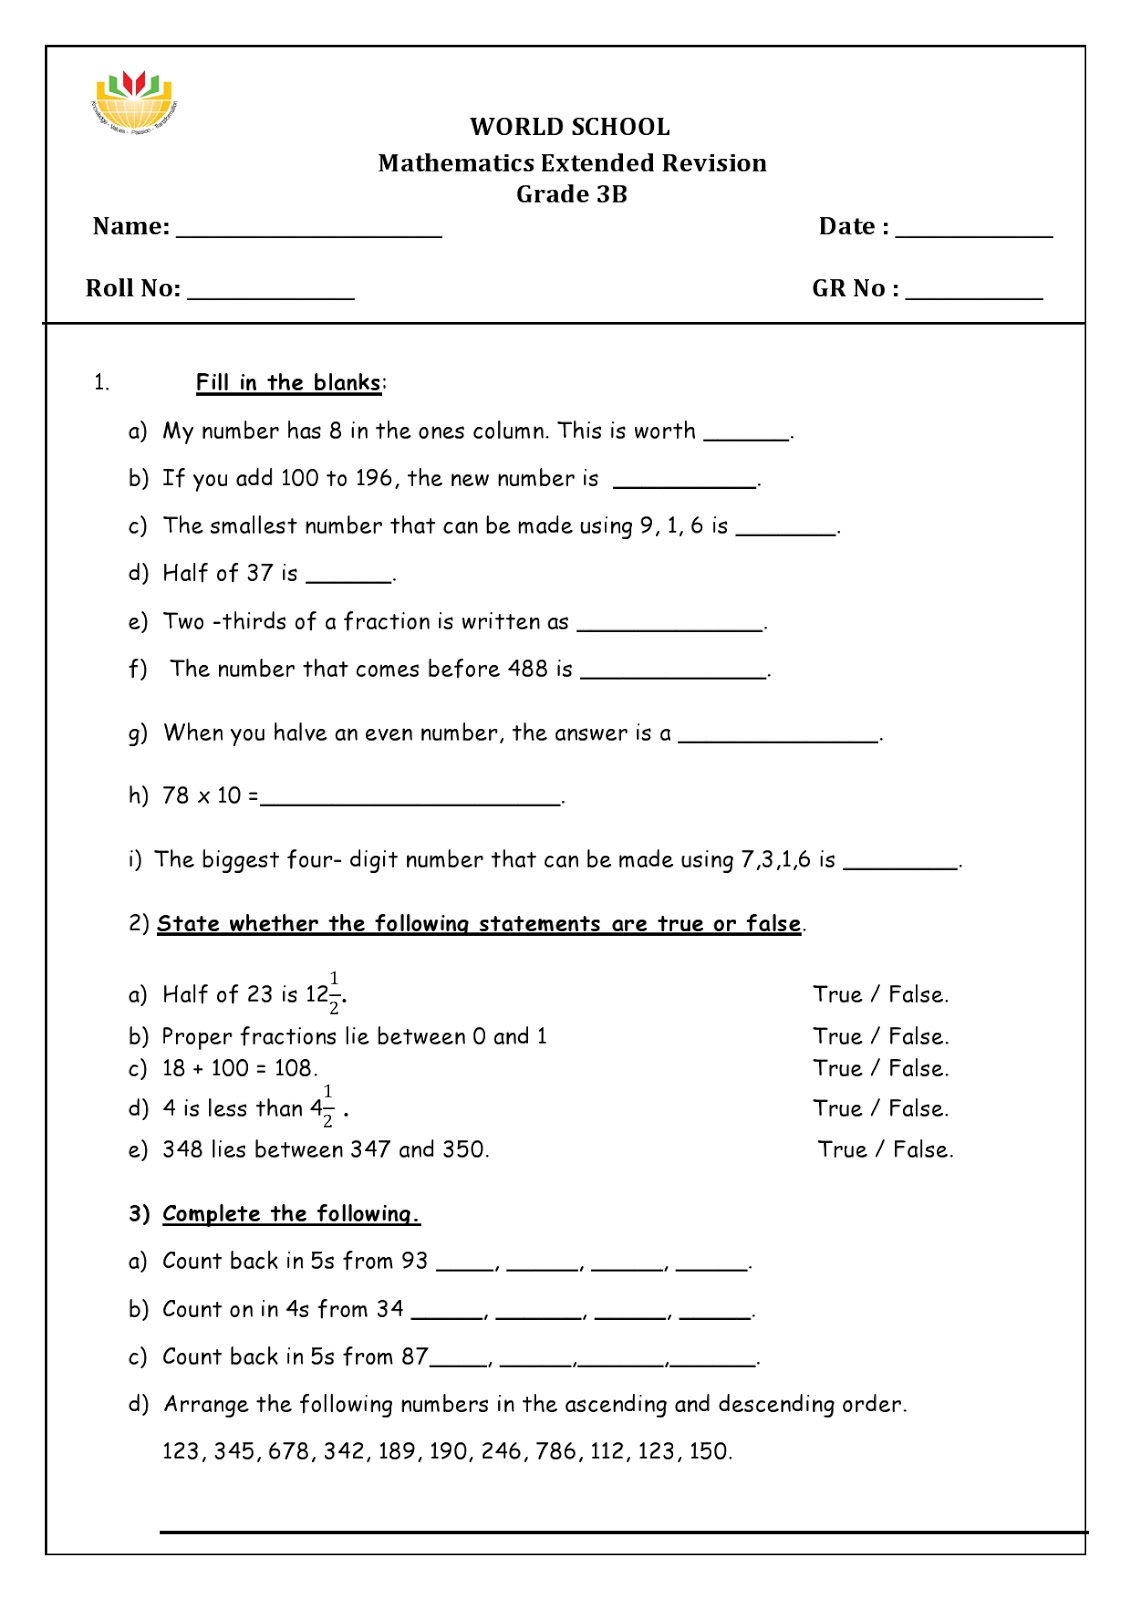 english-revision-worksheet-5th-grade-in-s-5-style-fiction-semiotics